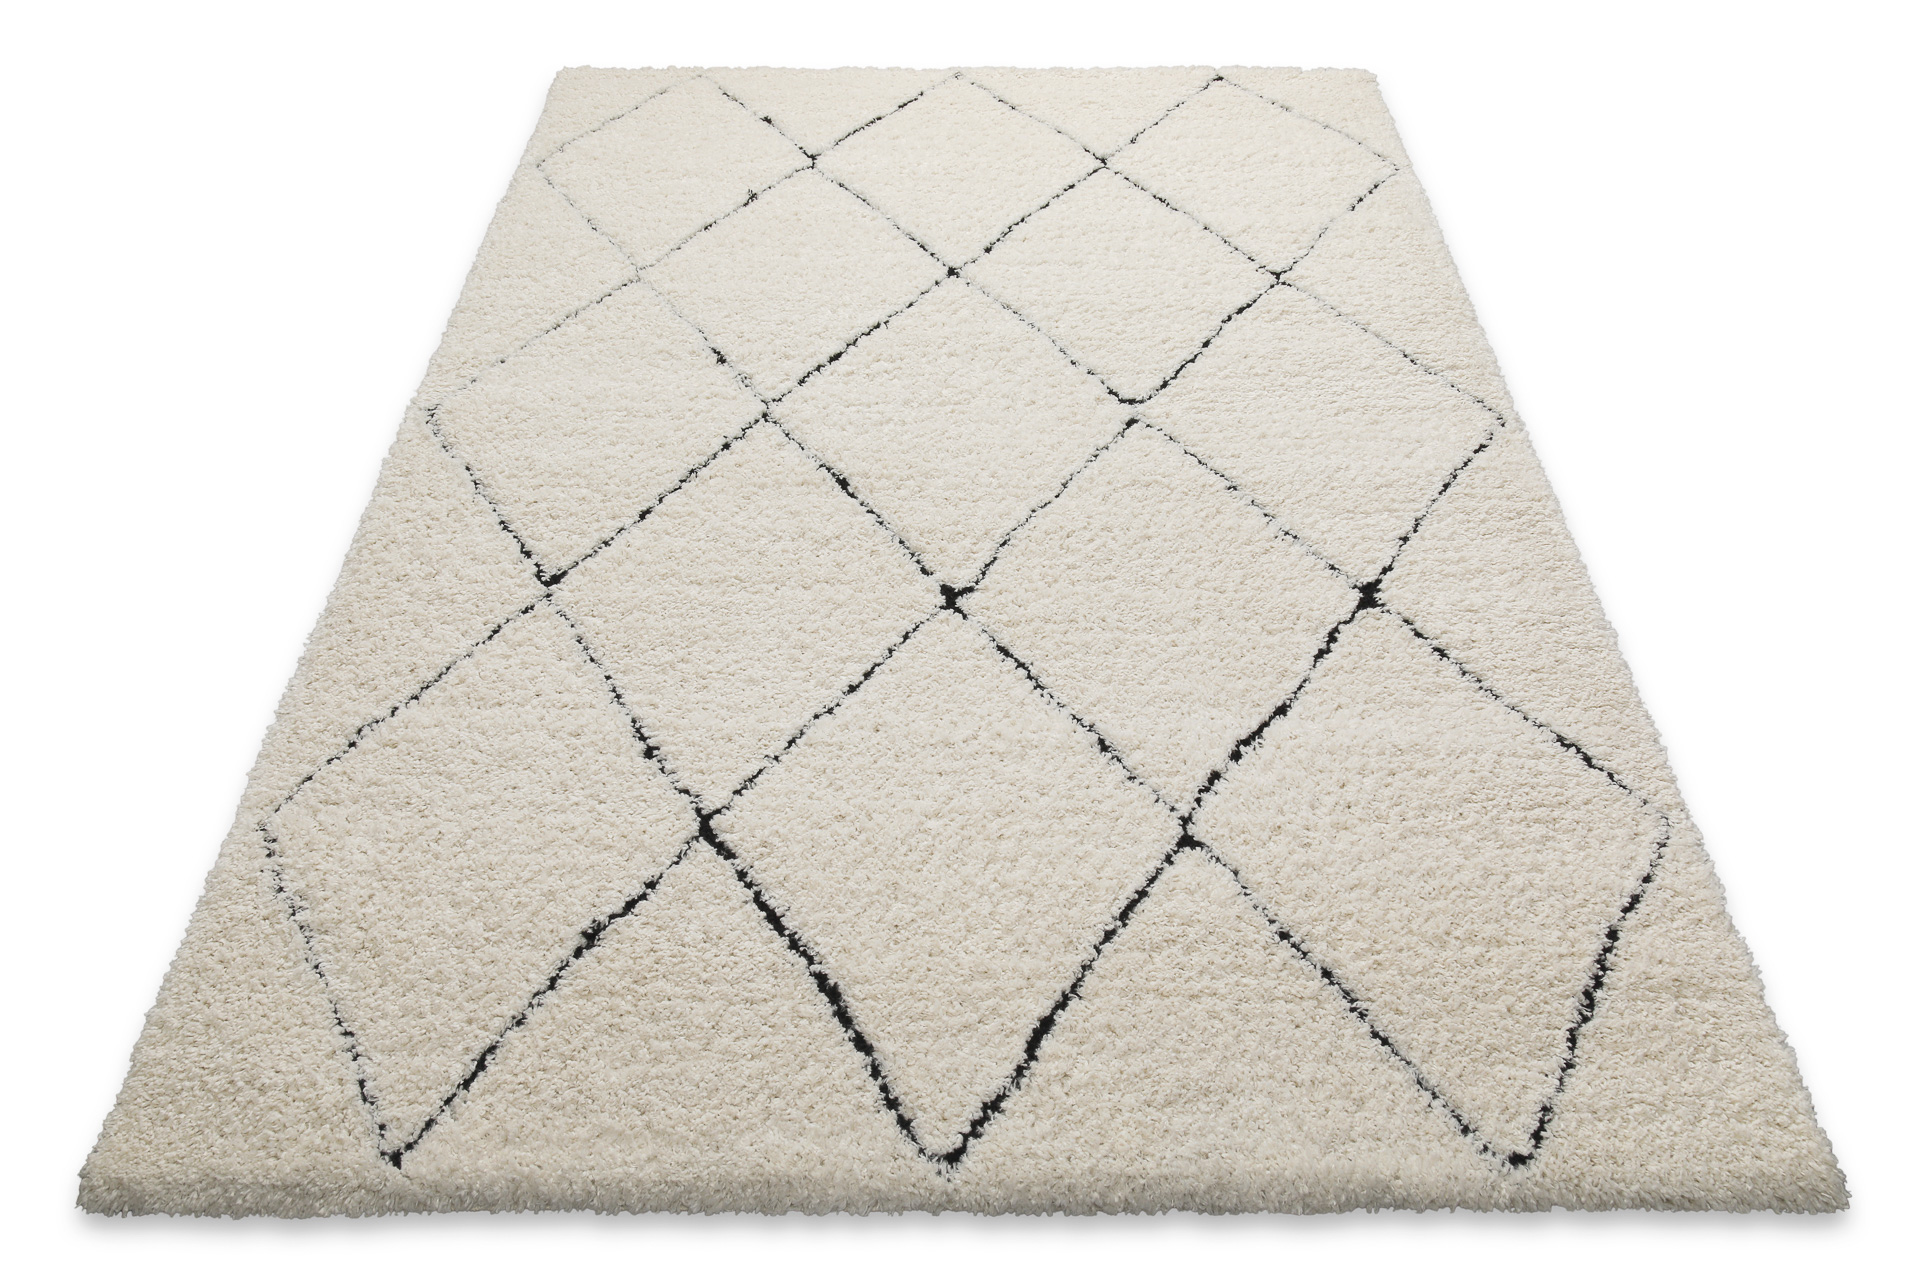 Teppich Creme Beige im Berber – Outlet- WECONhome two Style Teppiche Studio « »